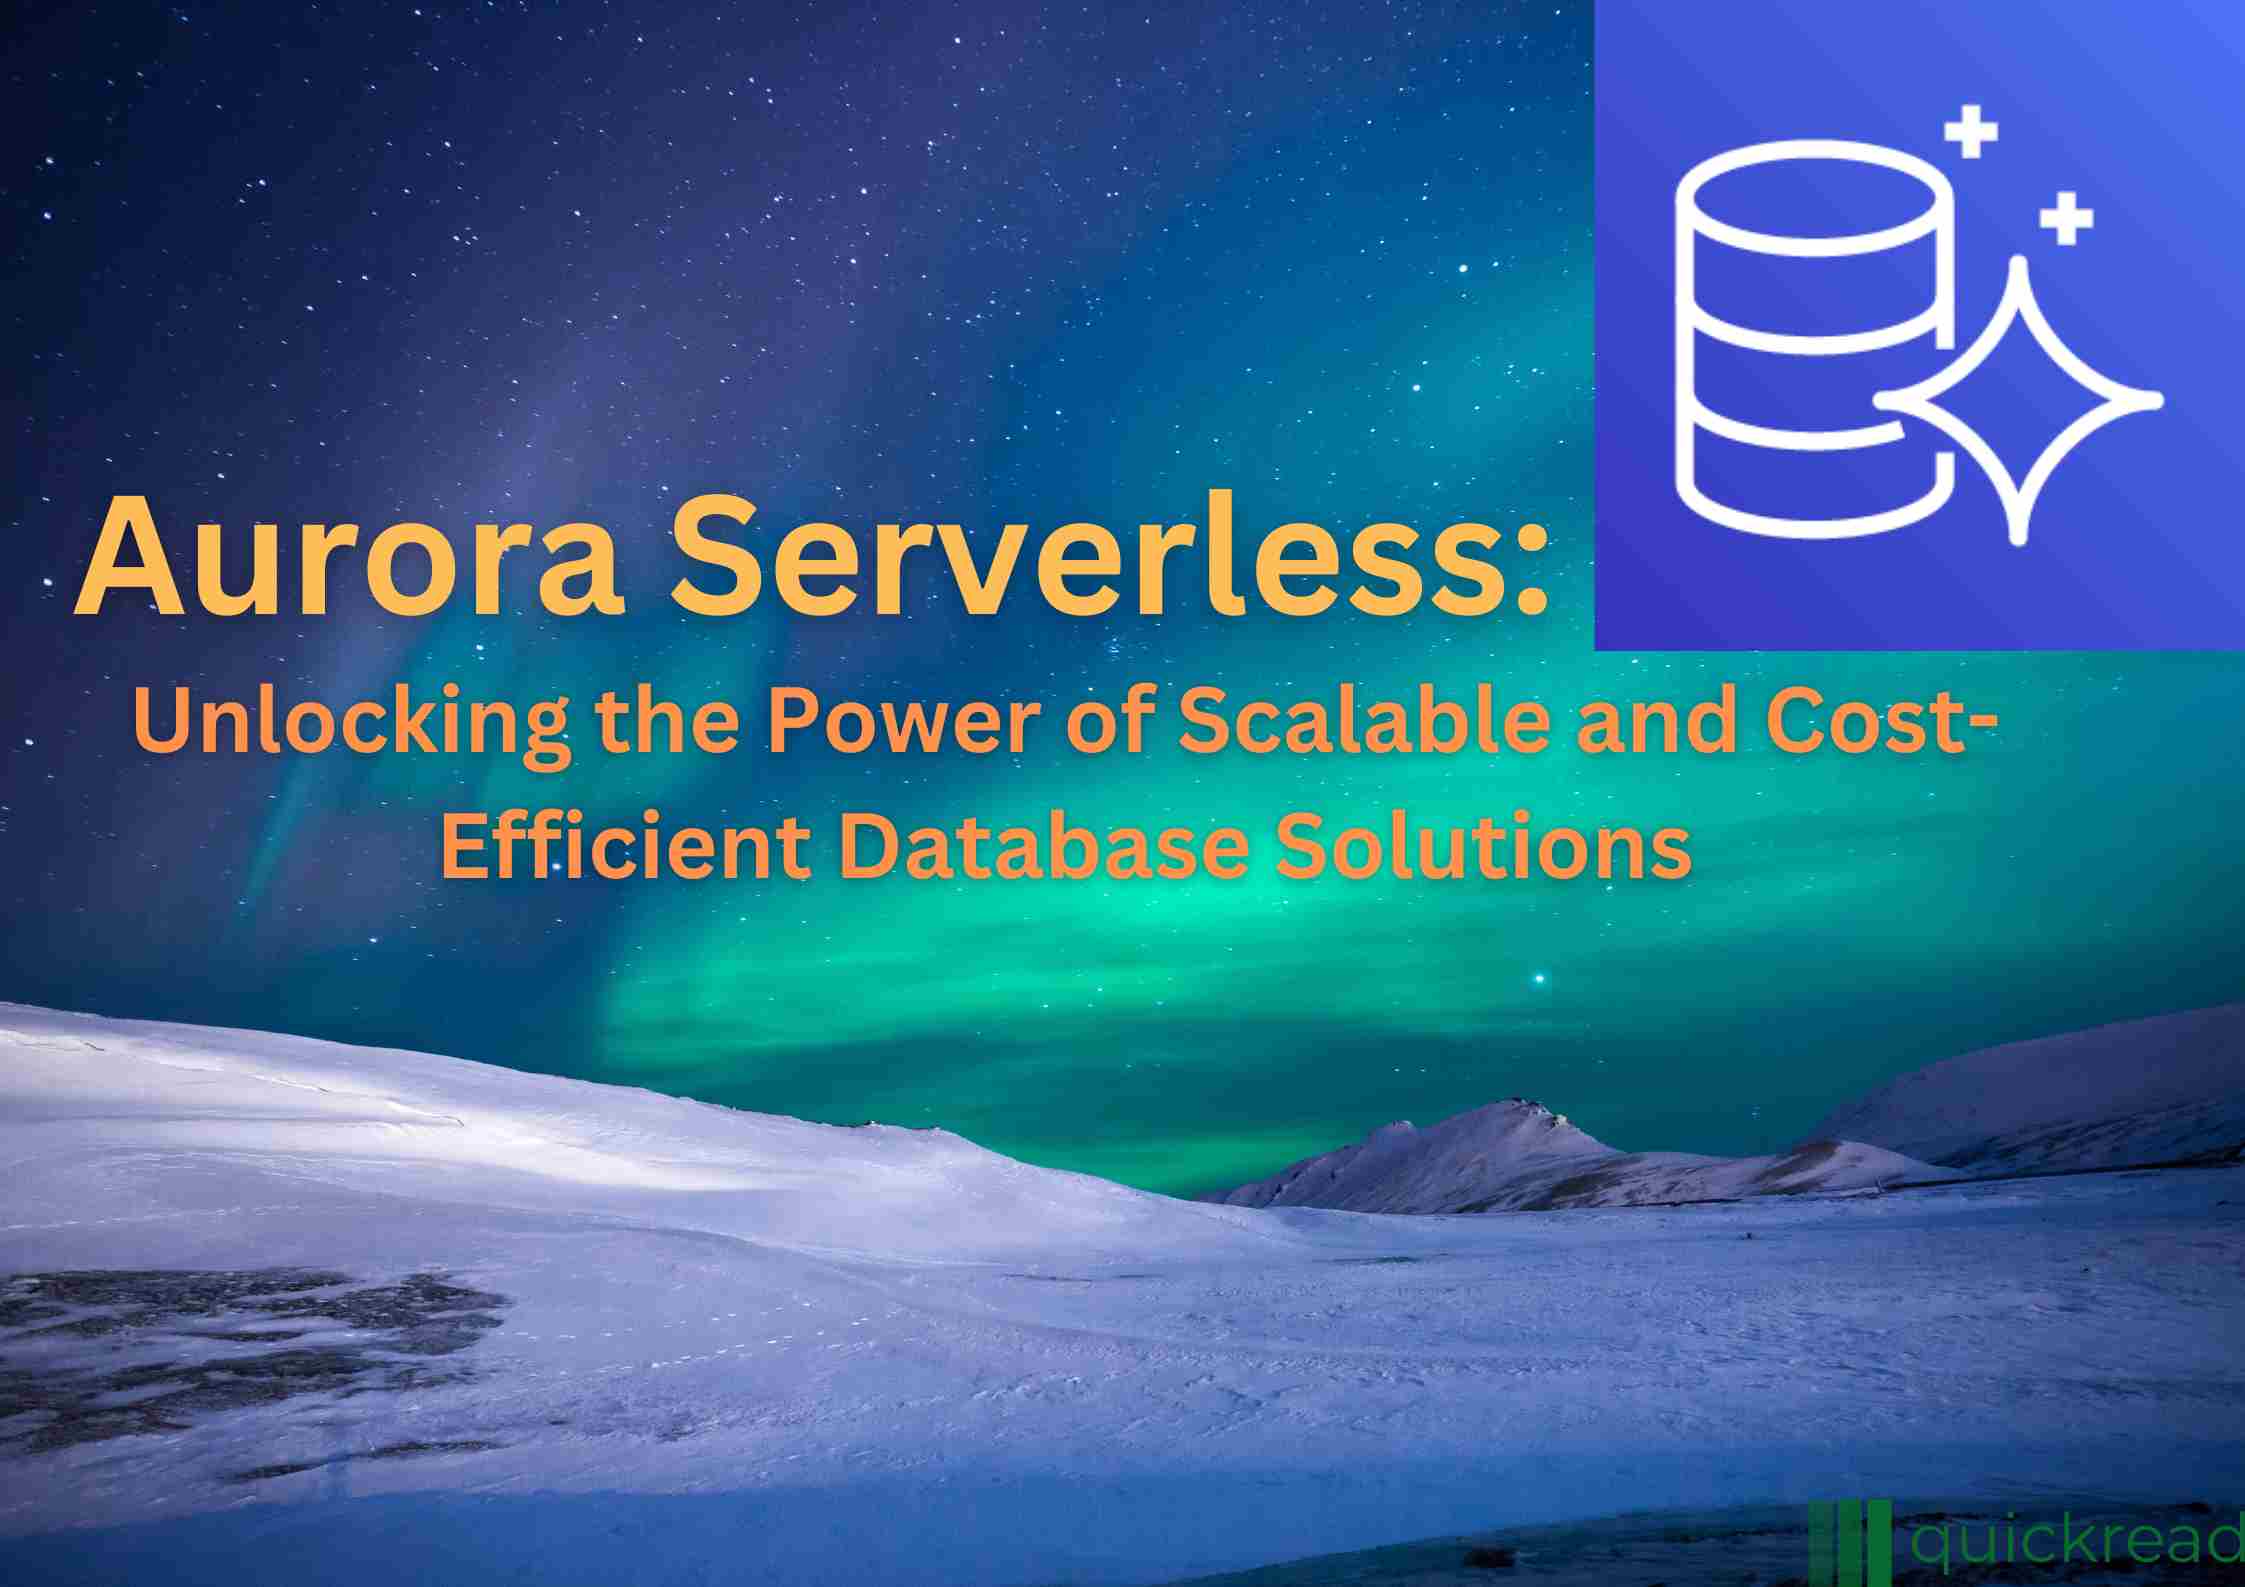 Aurora Serverless Unlocking the Power of Scalable and Cost-Efficient Database Solutions